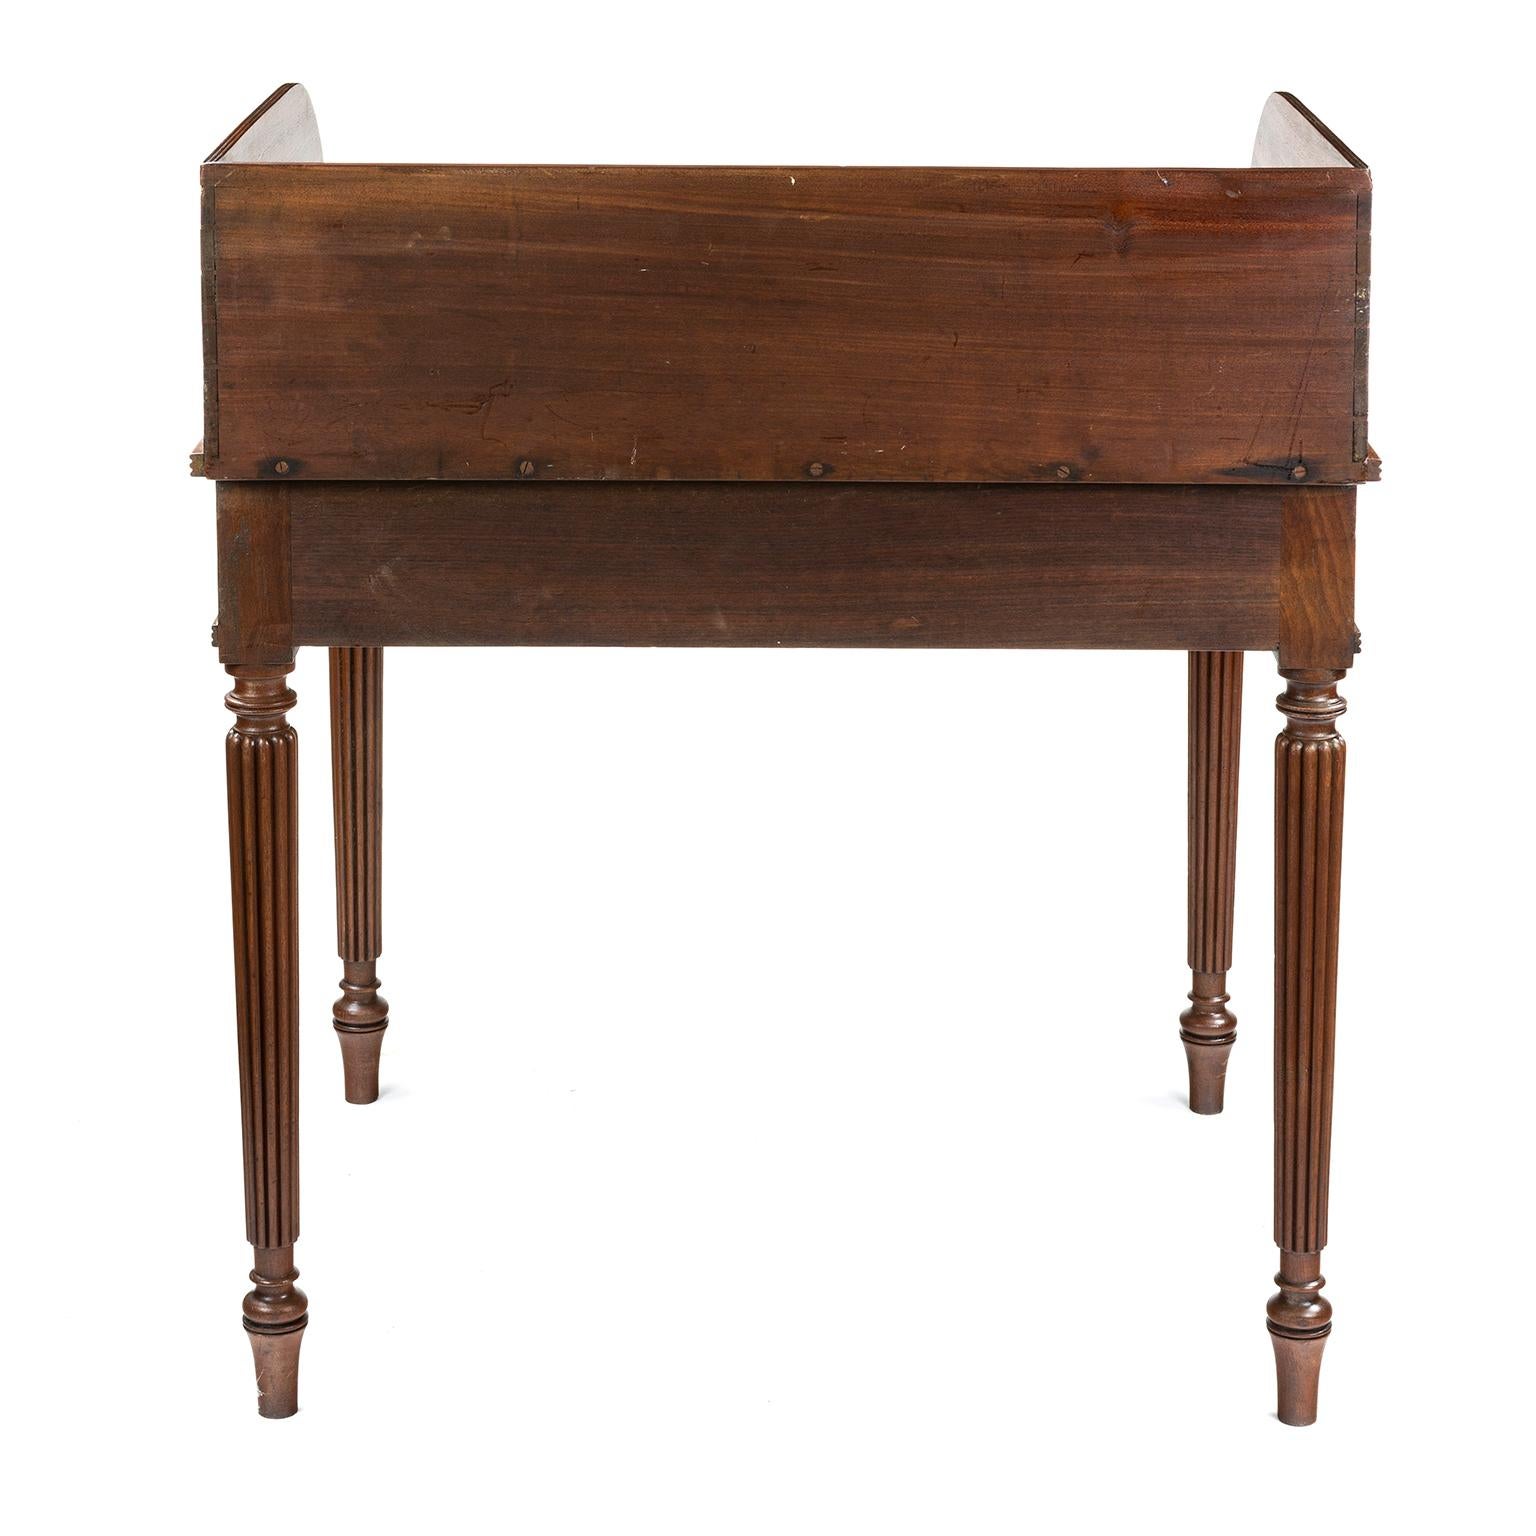 Regency Gillows wash stand / writing table in Mahogany 2